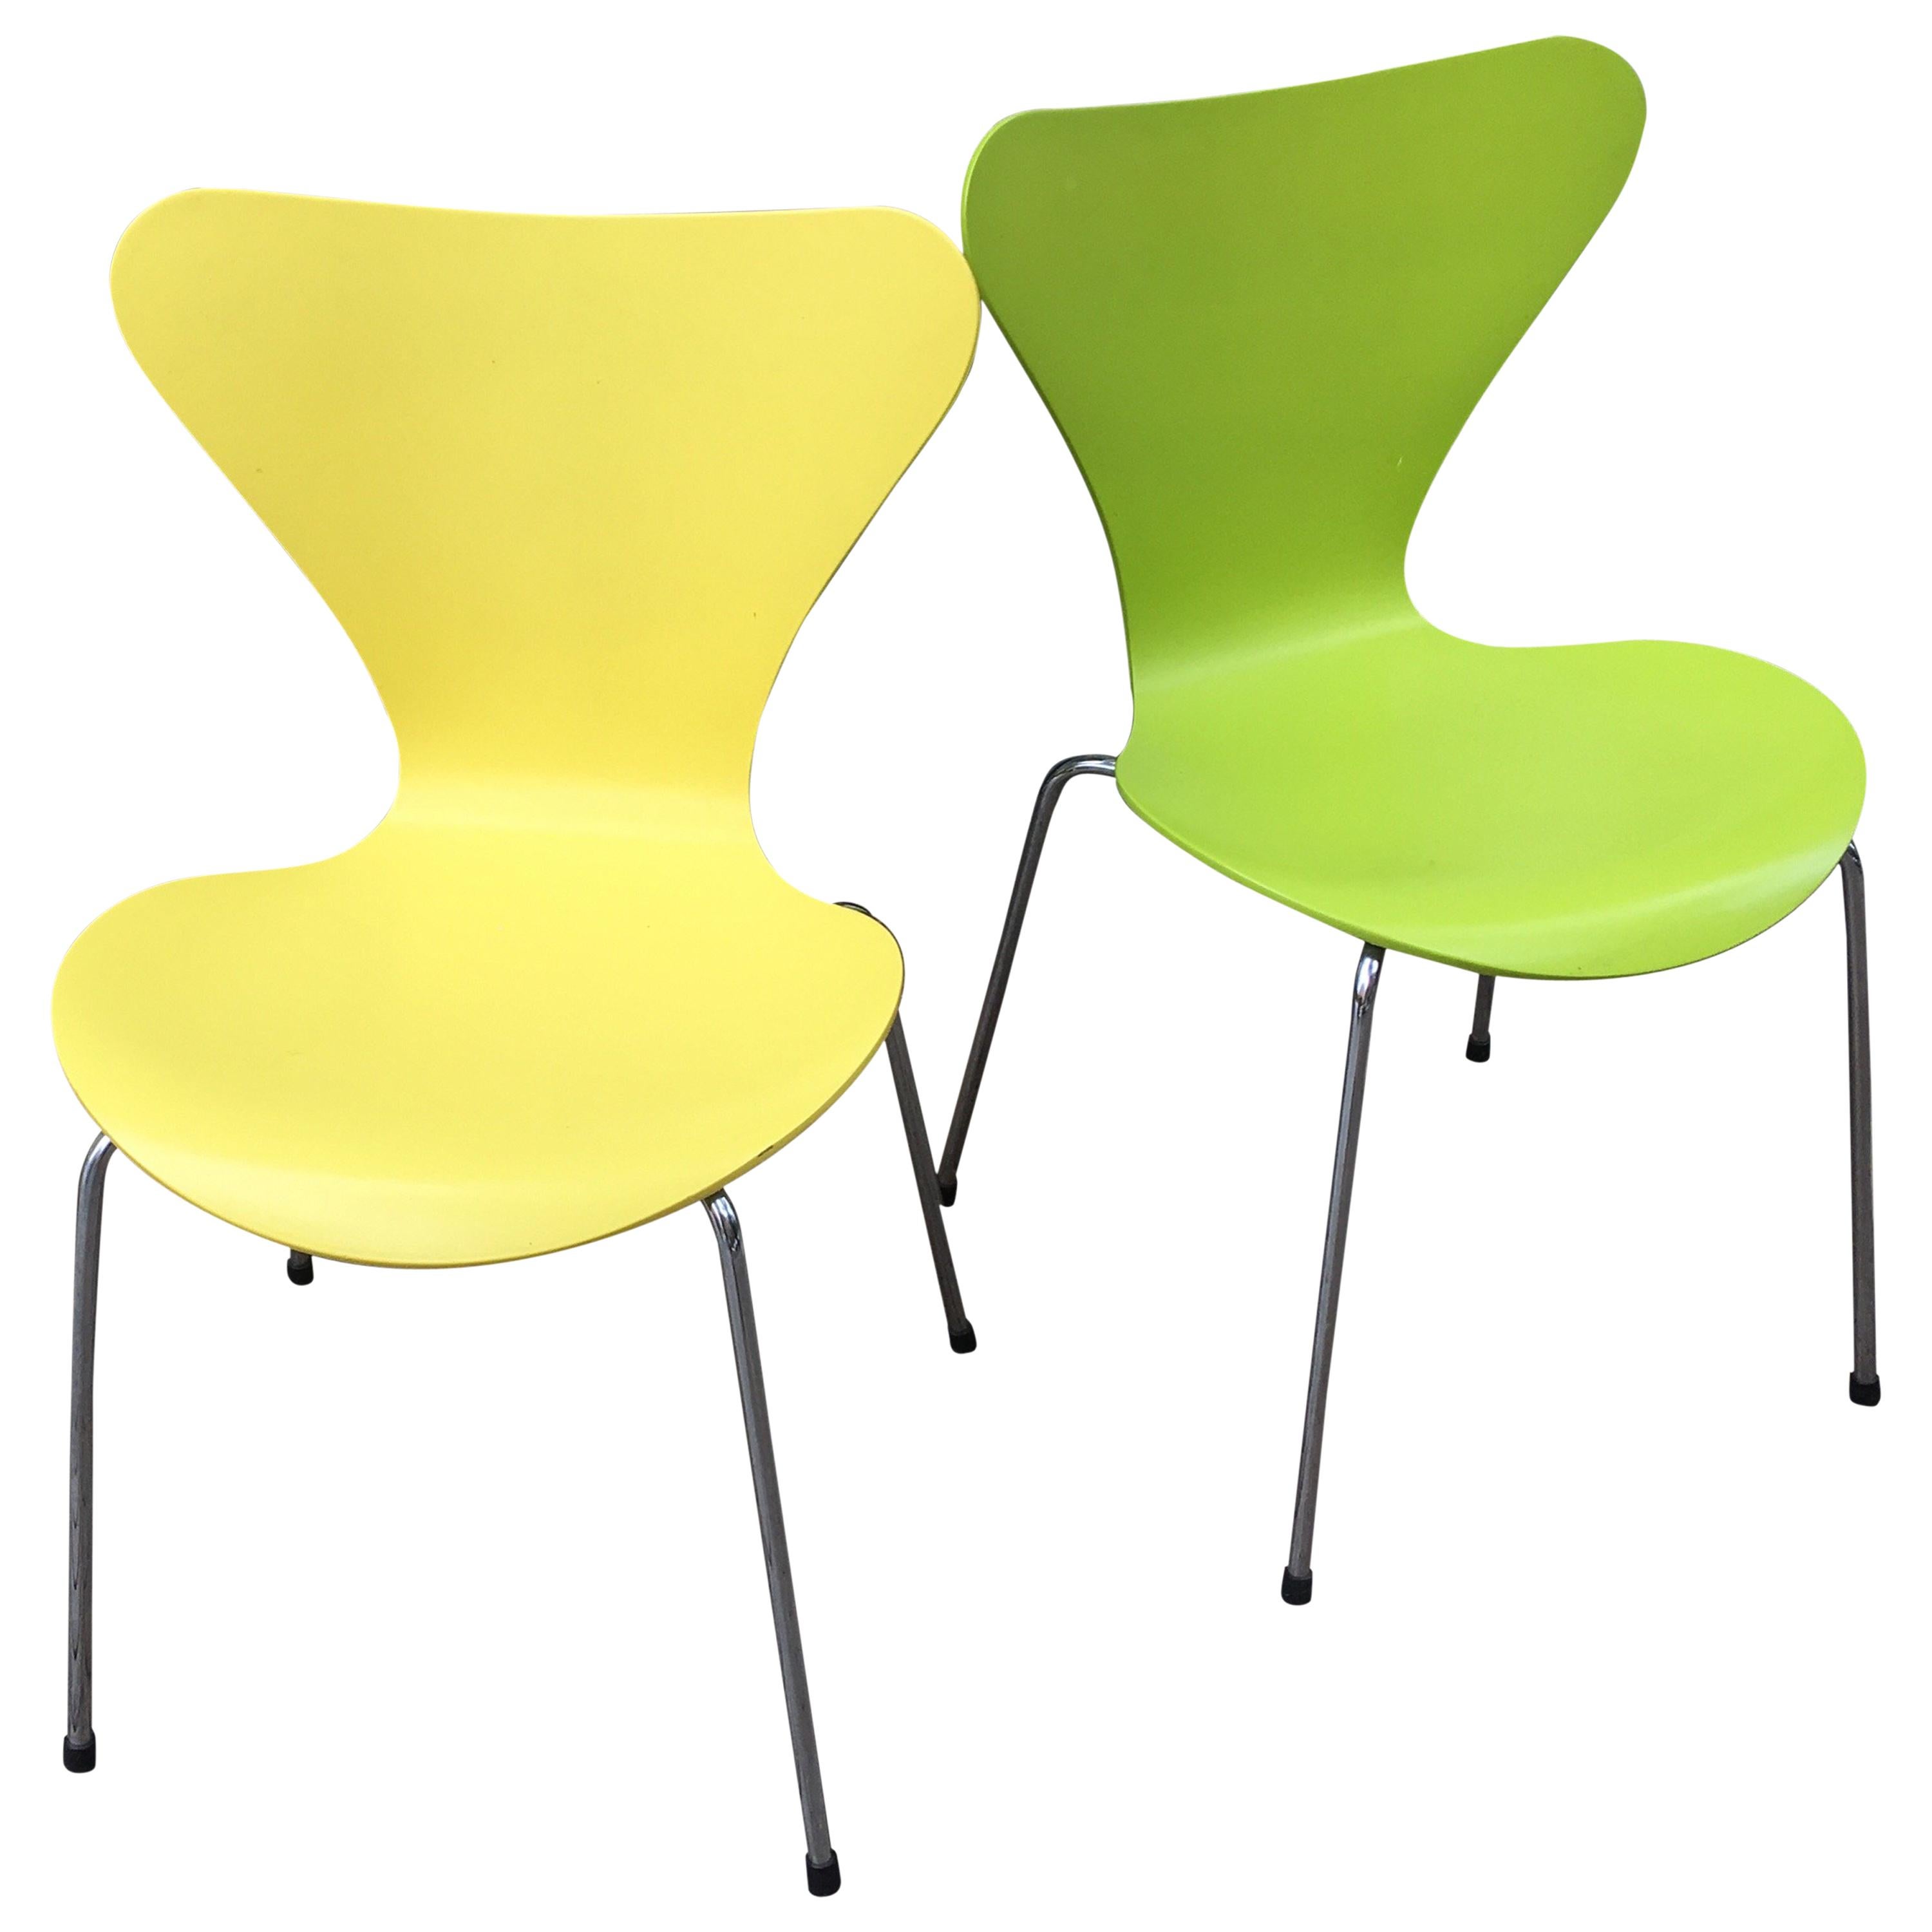 Arne Jacobsen Ant Chairs in Yellow and Green, Series 7 Model 3107